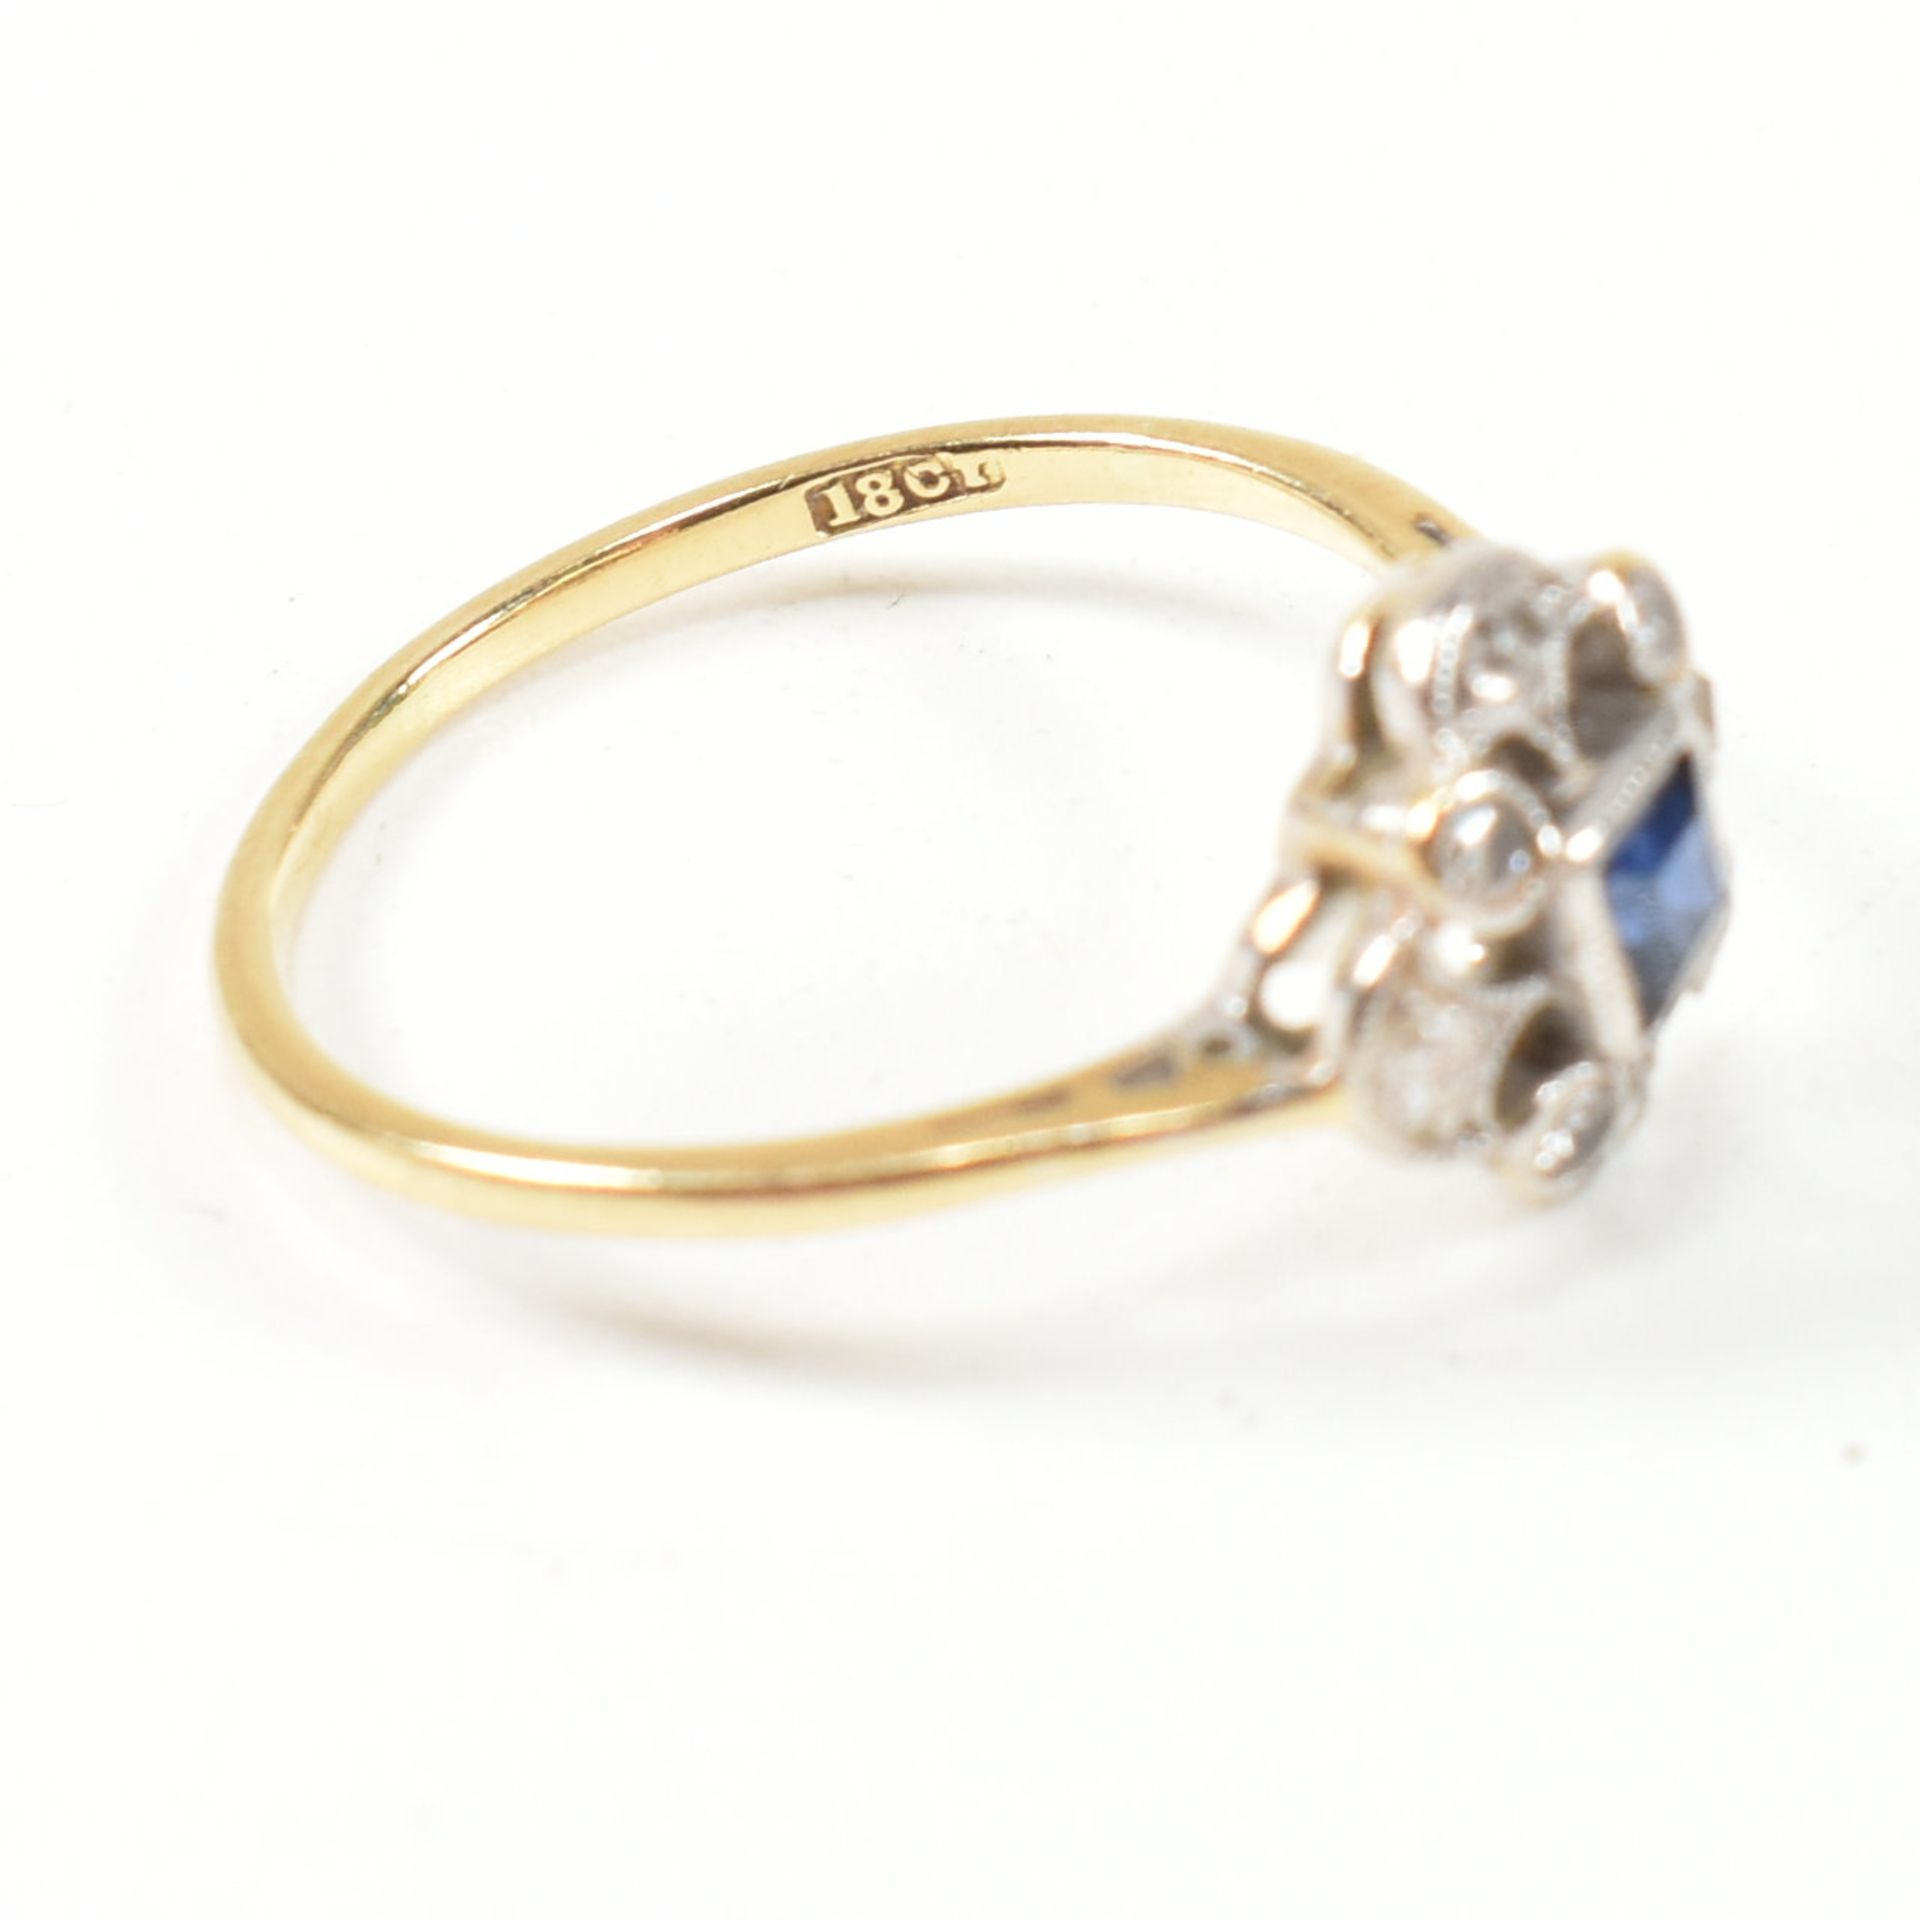 1920S 18CT GOLD SAPPHIRE & DIAMOND CLUSTER RING - Image 7 of 8